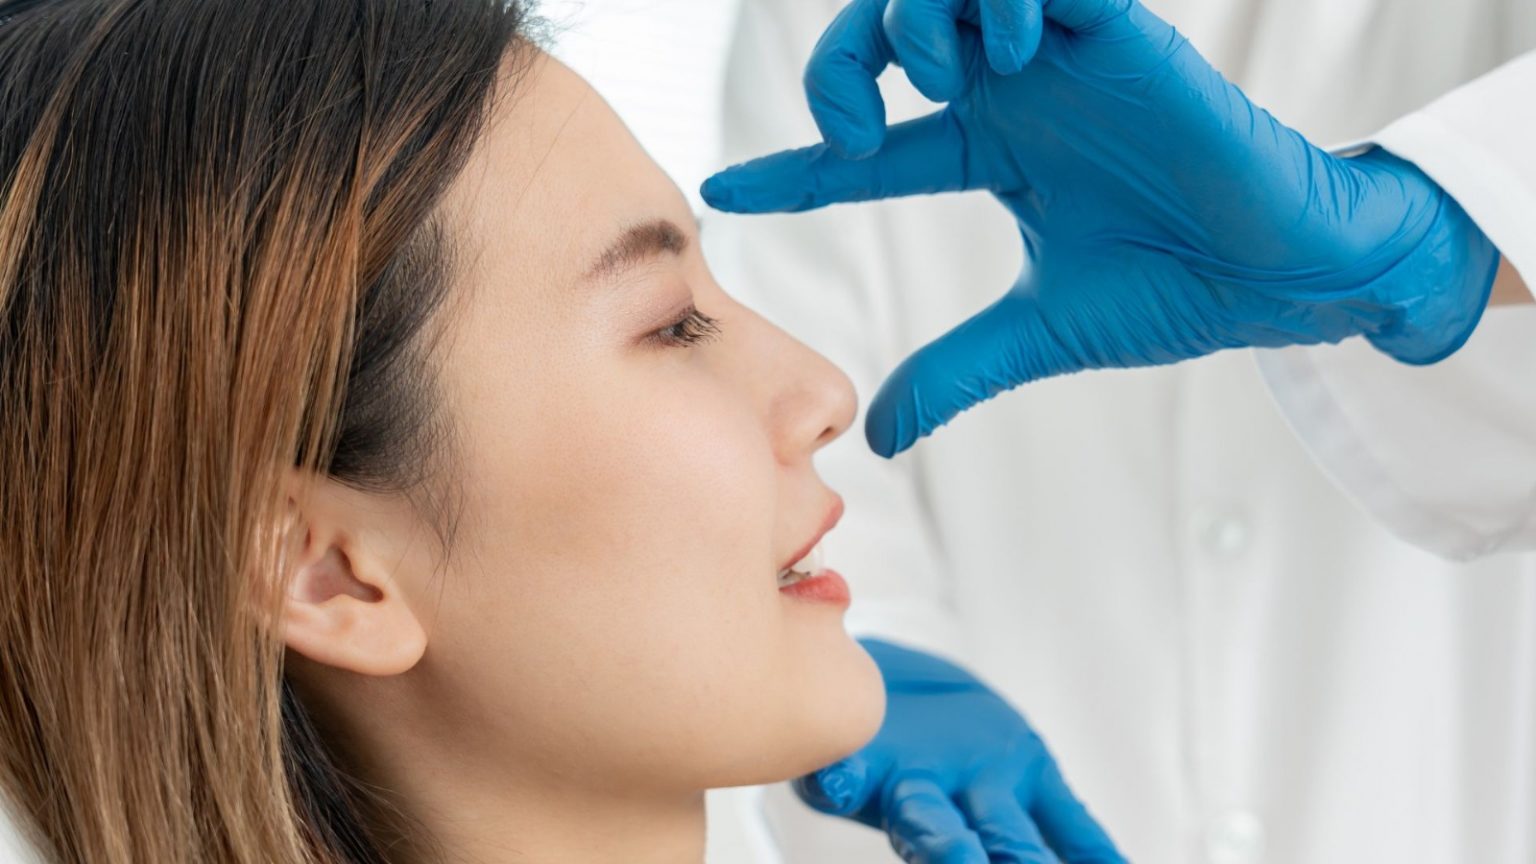 What are the types of Nose Surgeries?